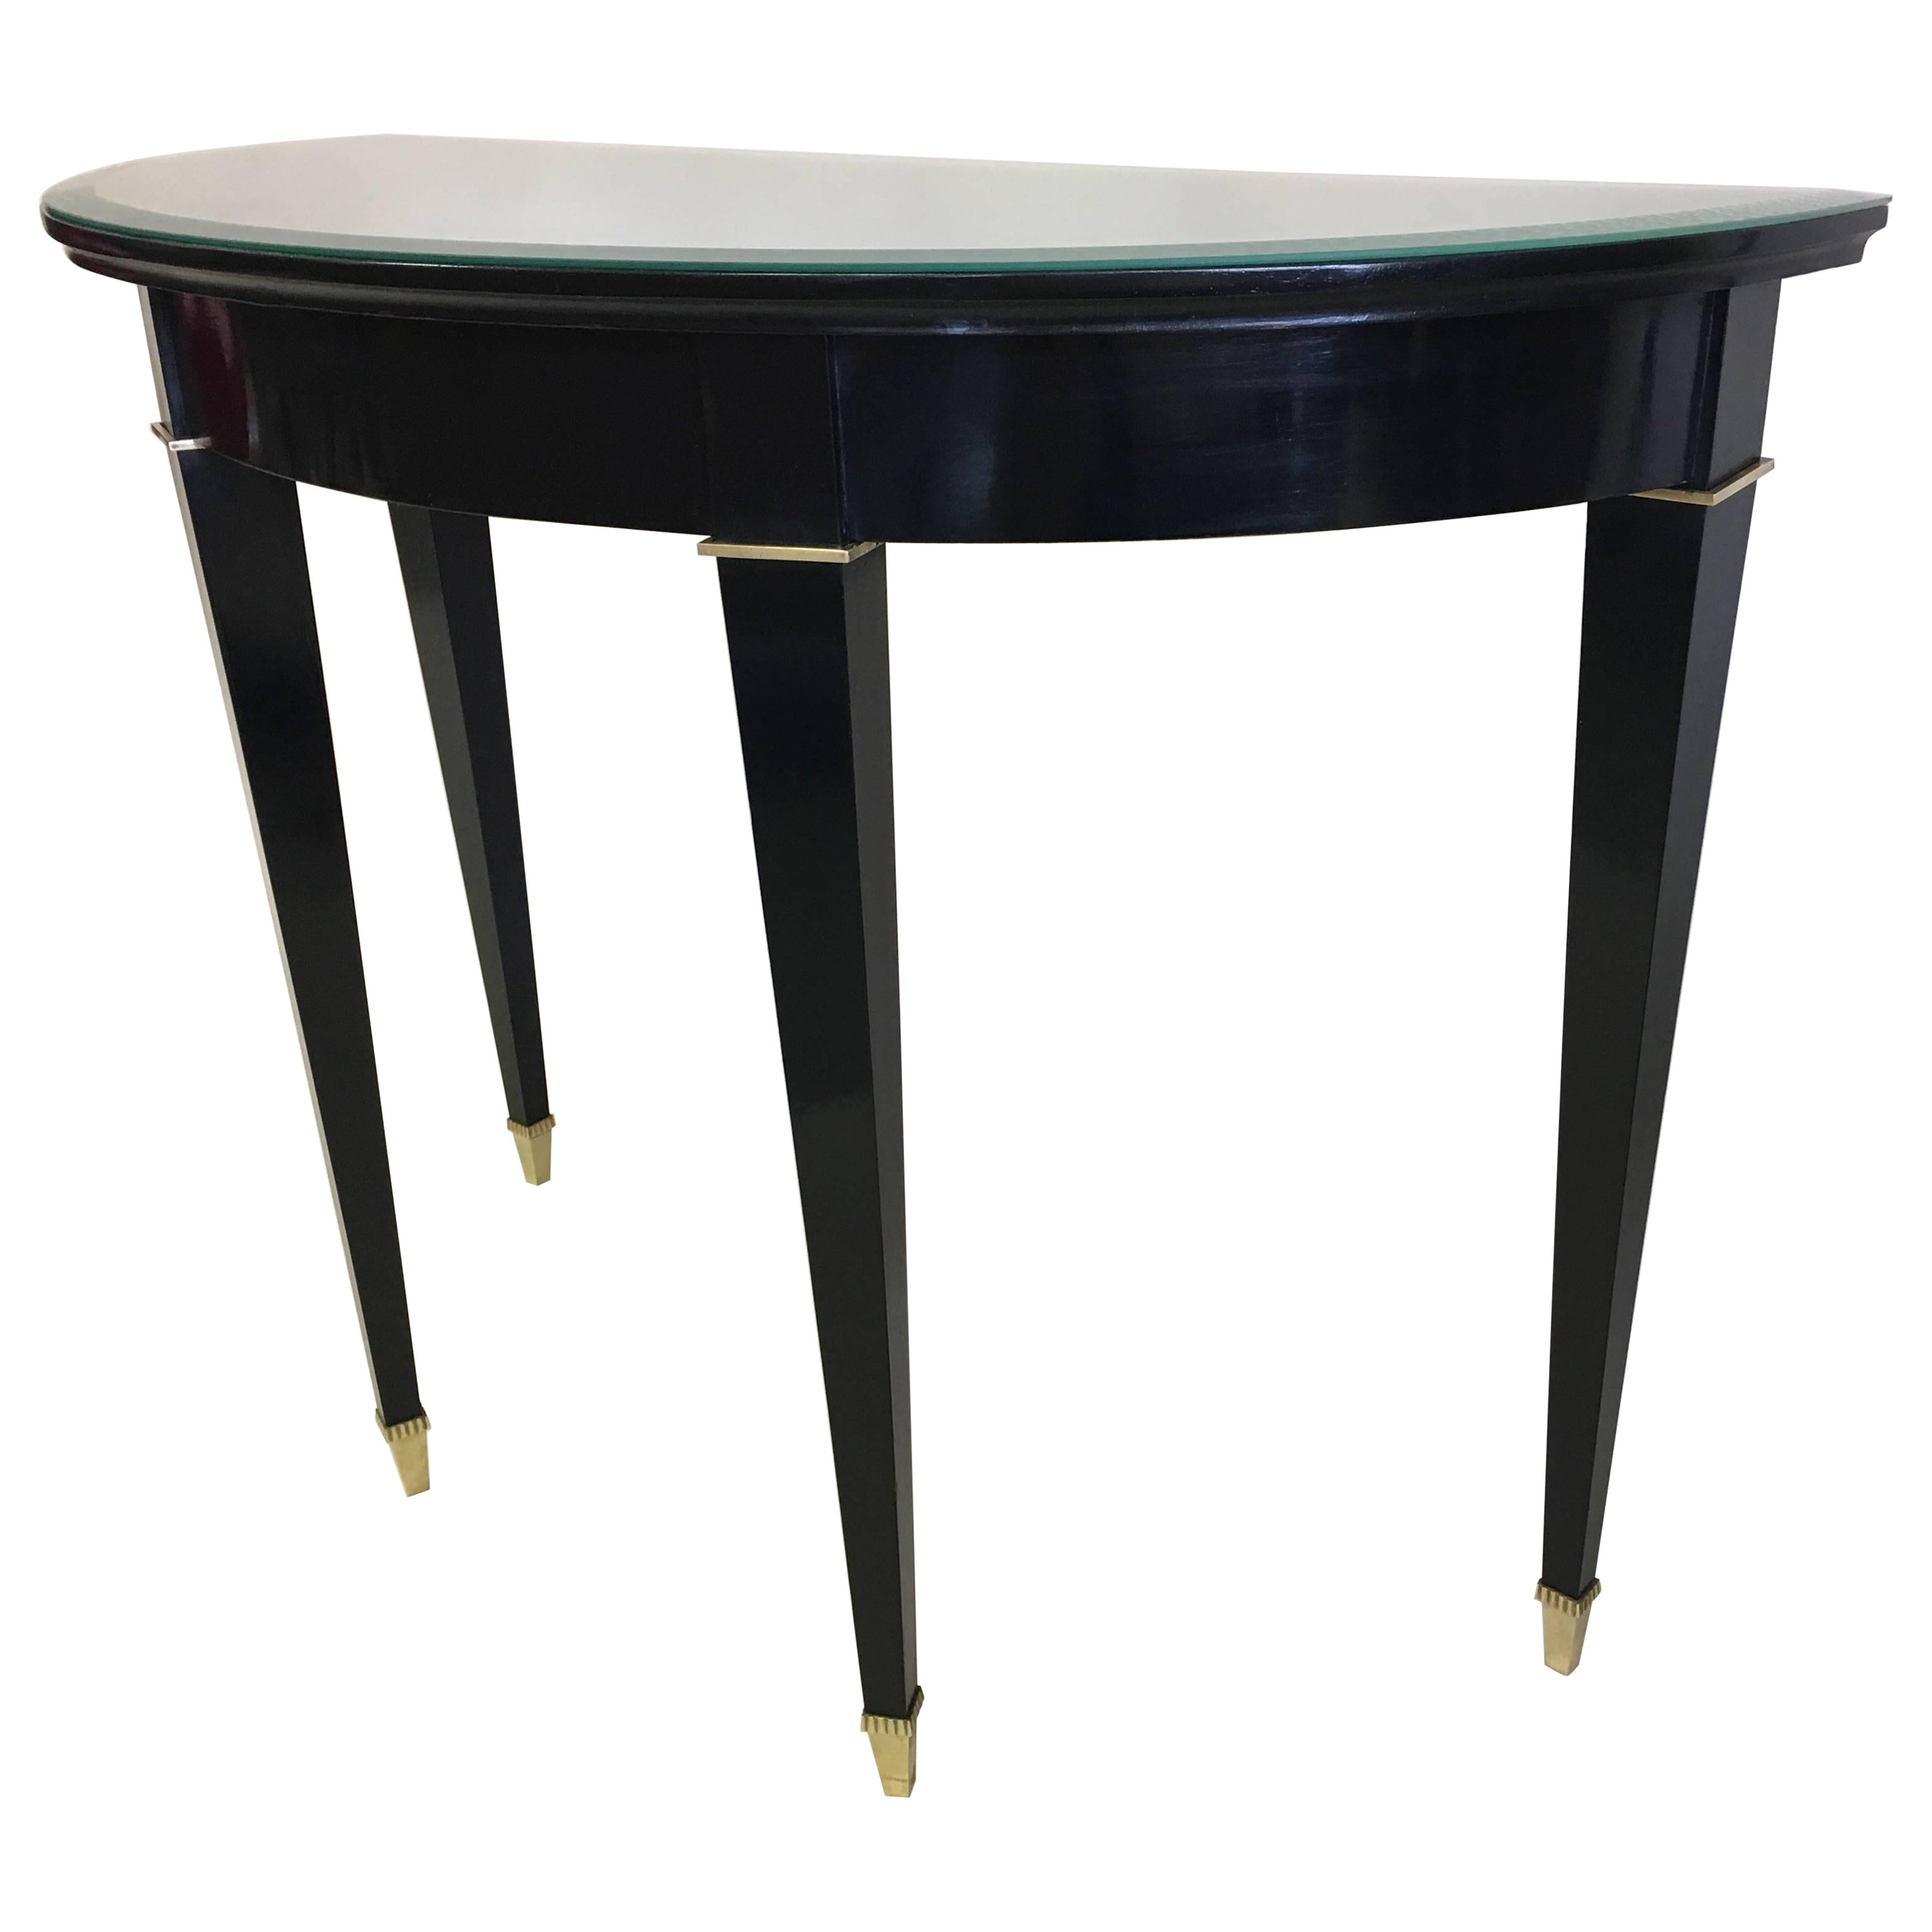 French Modern Neoclassical Black Lacquer Demilune Console Attr. to Andre Arbus For Sale